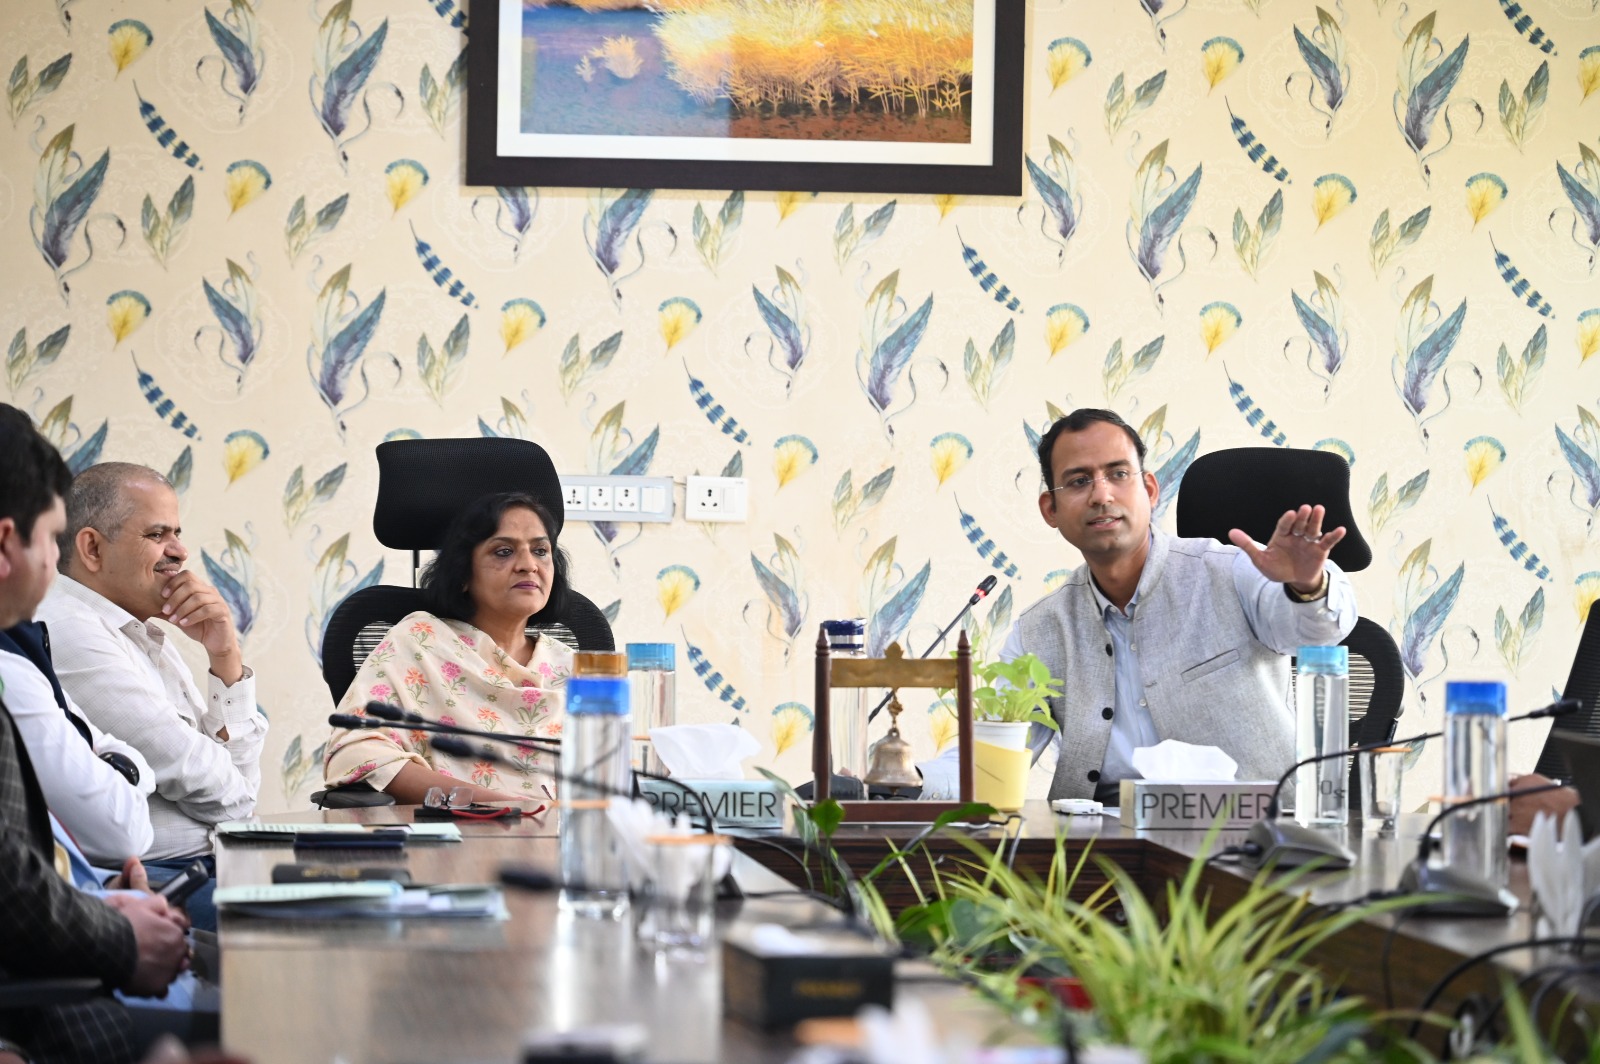 Ms. Nivedita Shukla Verma, Secretary of the Government of India, Department of Chemicals & Petrochemicals visited AMTZ ecosystem & met Dr. Jitendra Sharma, MD & Founder CEO, AMTZ | Health Care Medical Technology in India